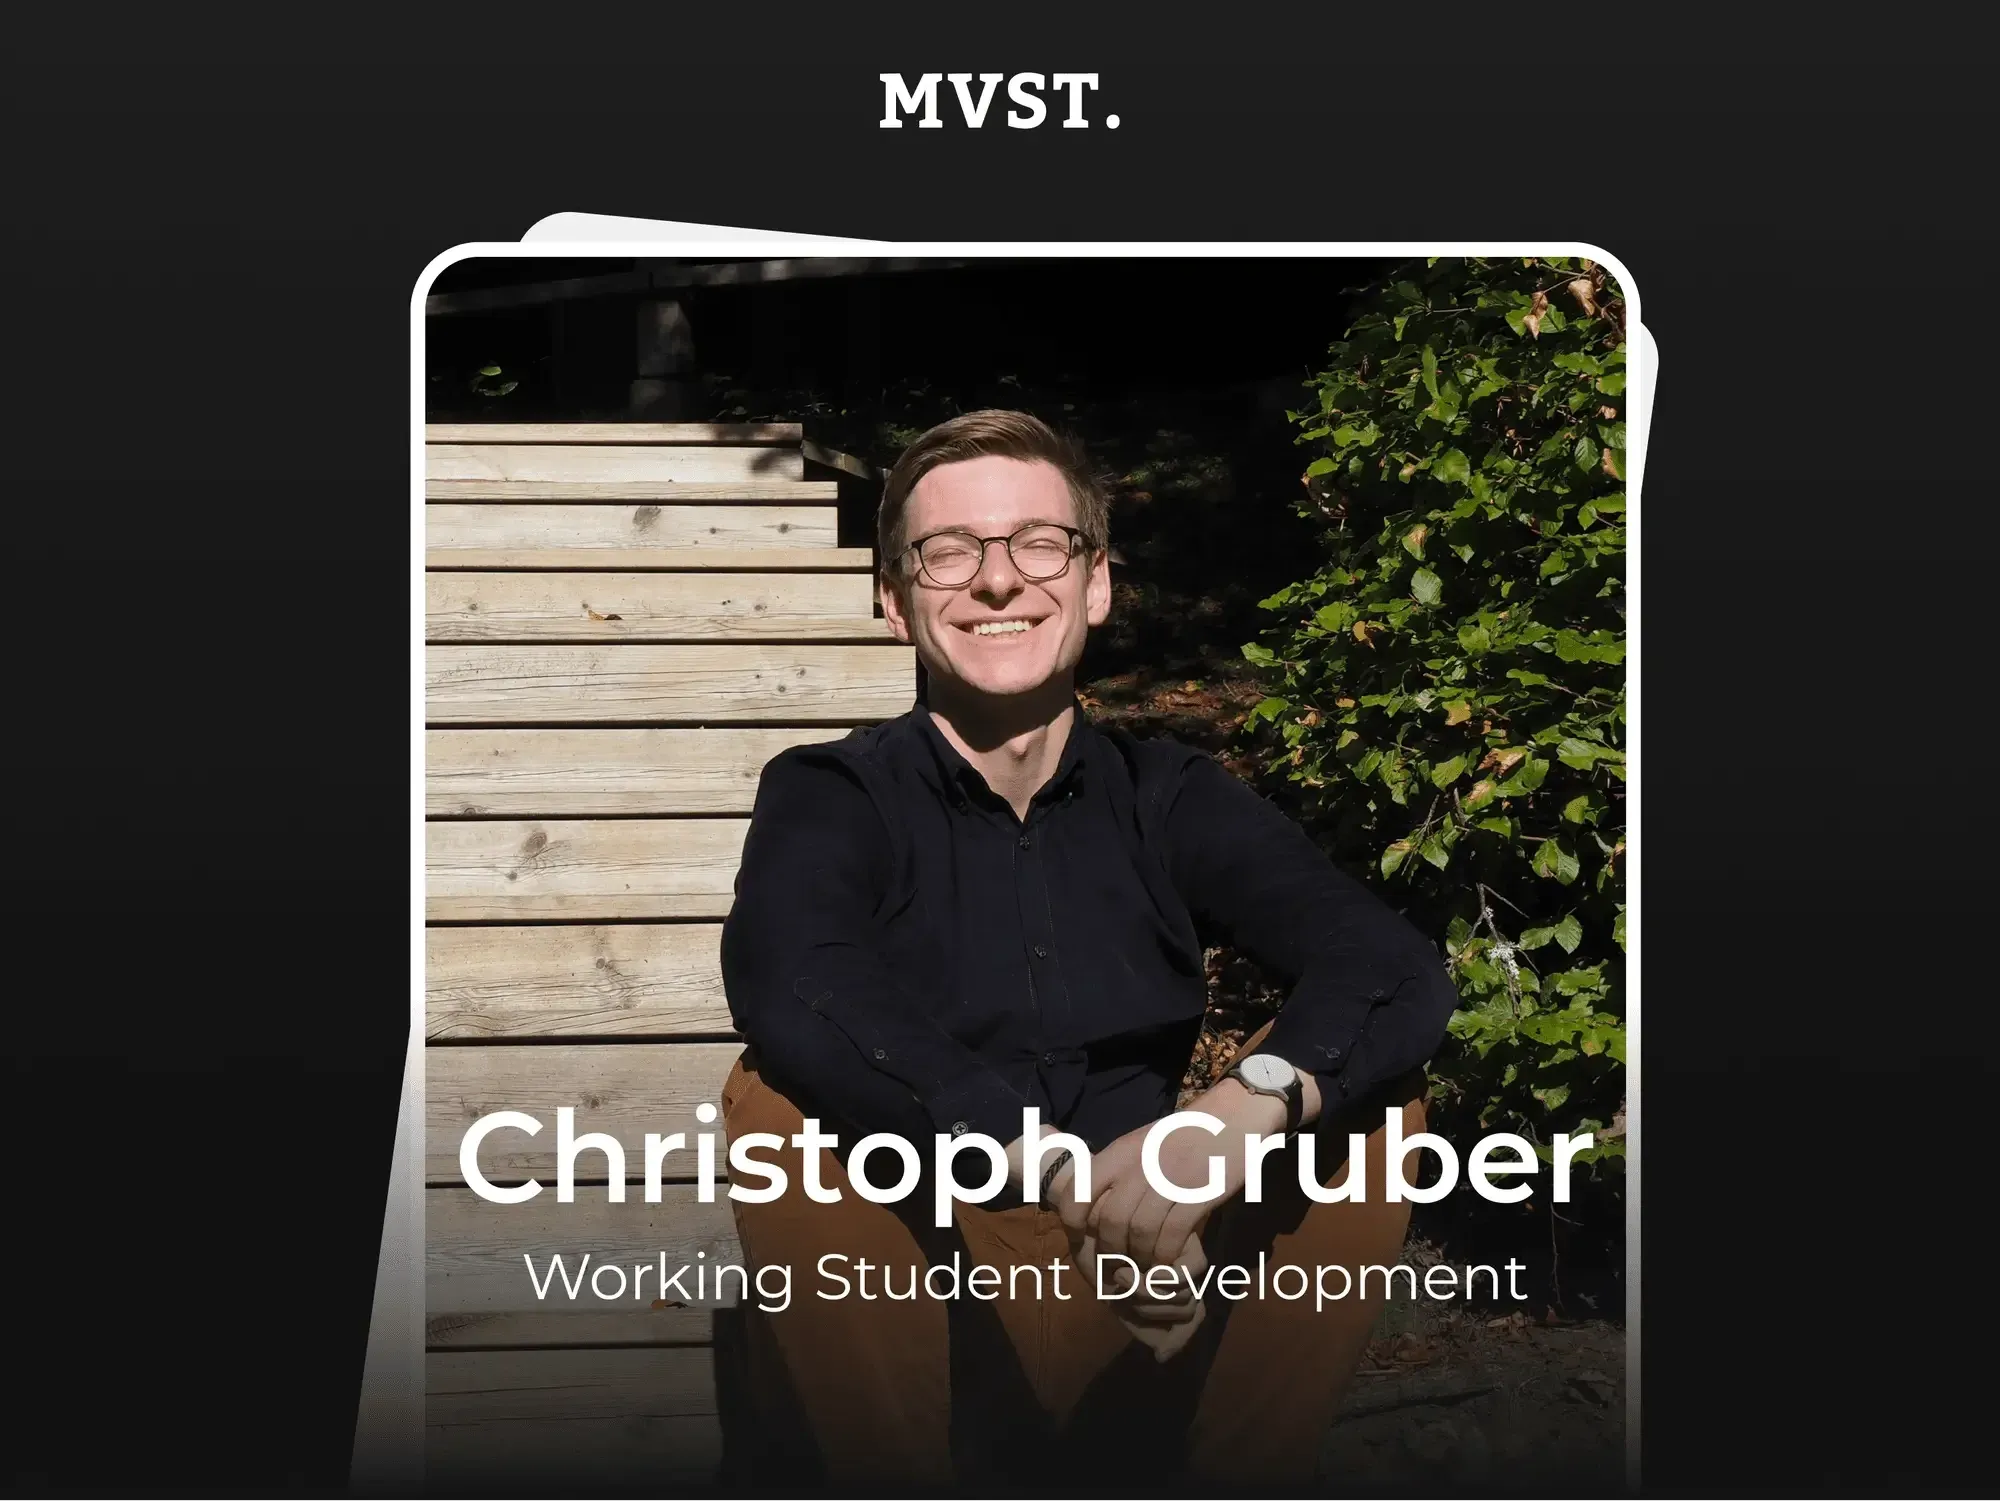 Welcome to MVST, Christoph!